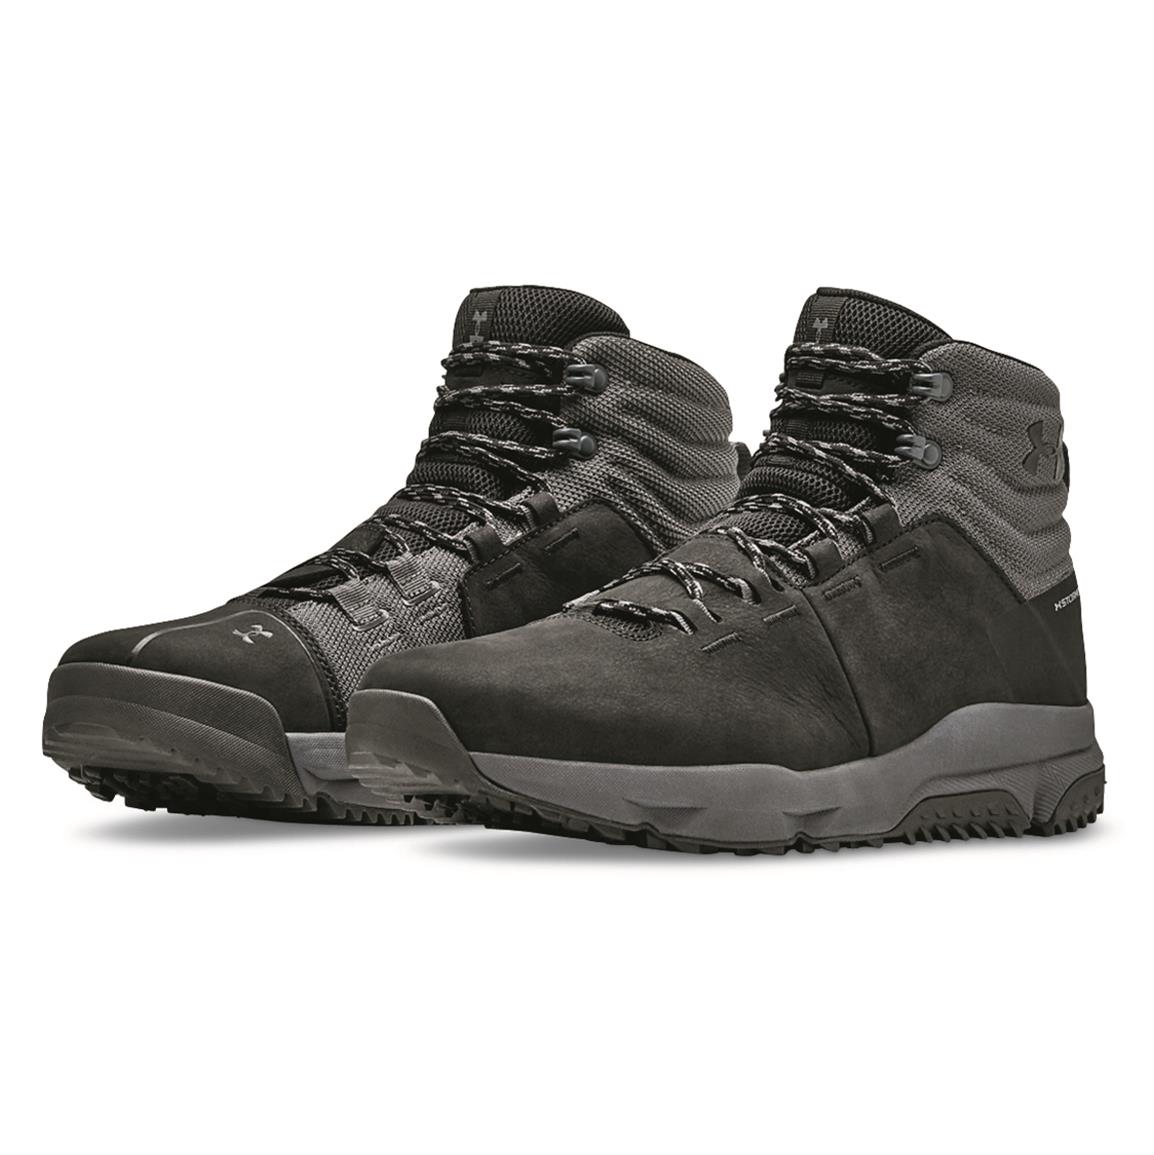 Under Armour Men's Culver Mid Waterproof Hiking Boots - 707551, Hiking ...